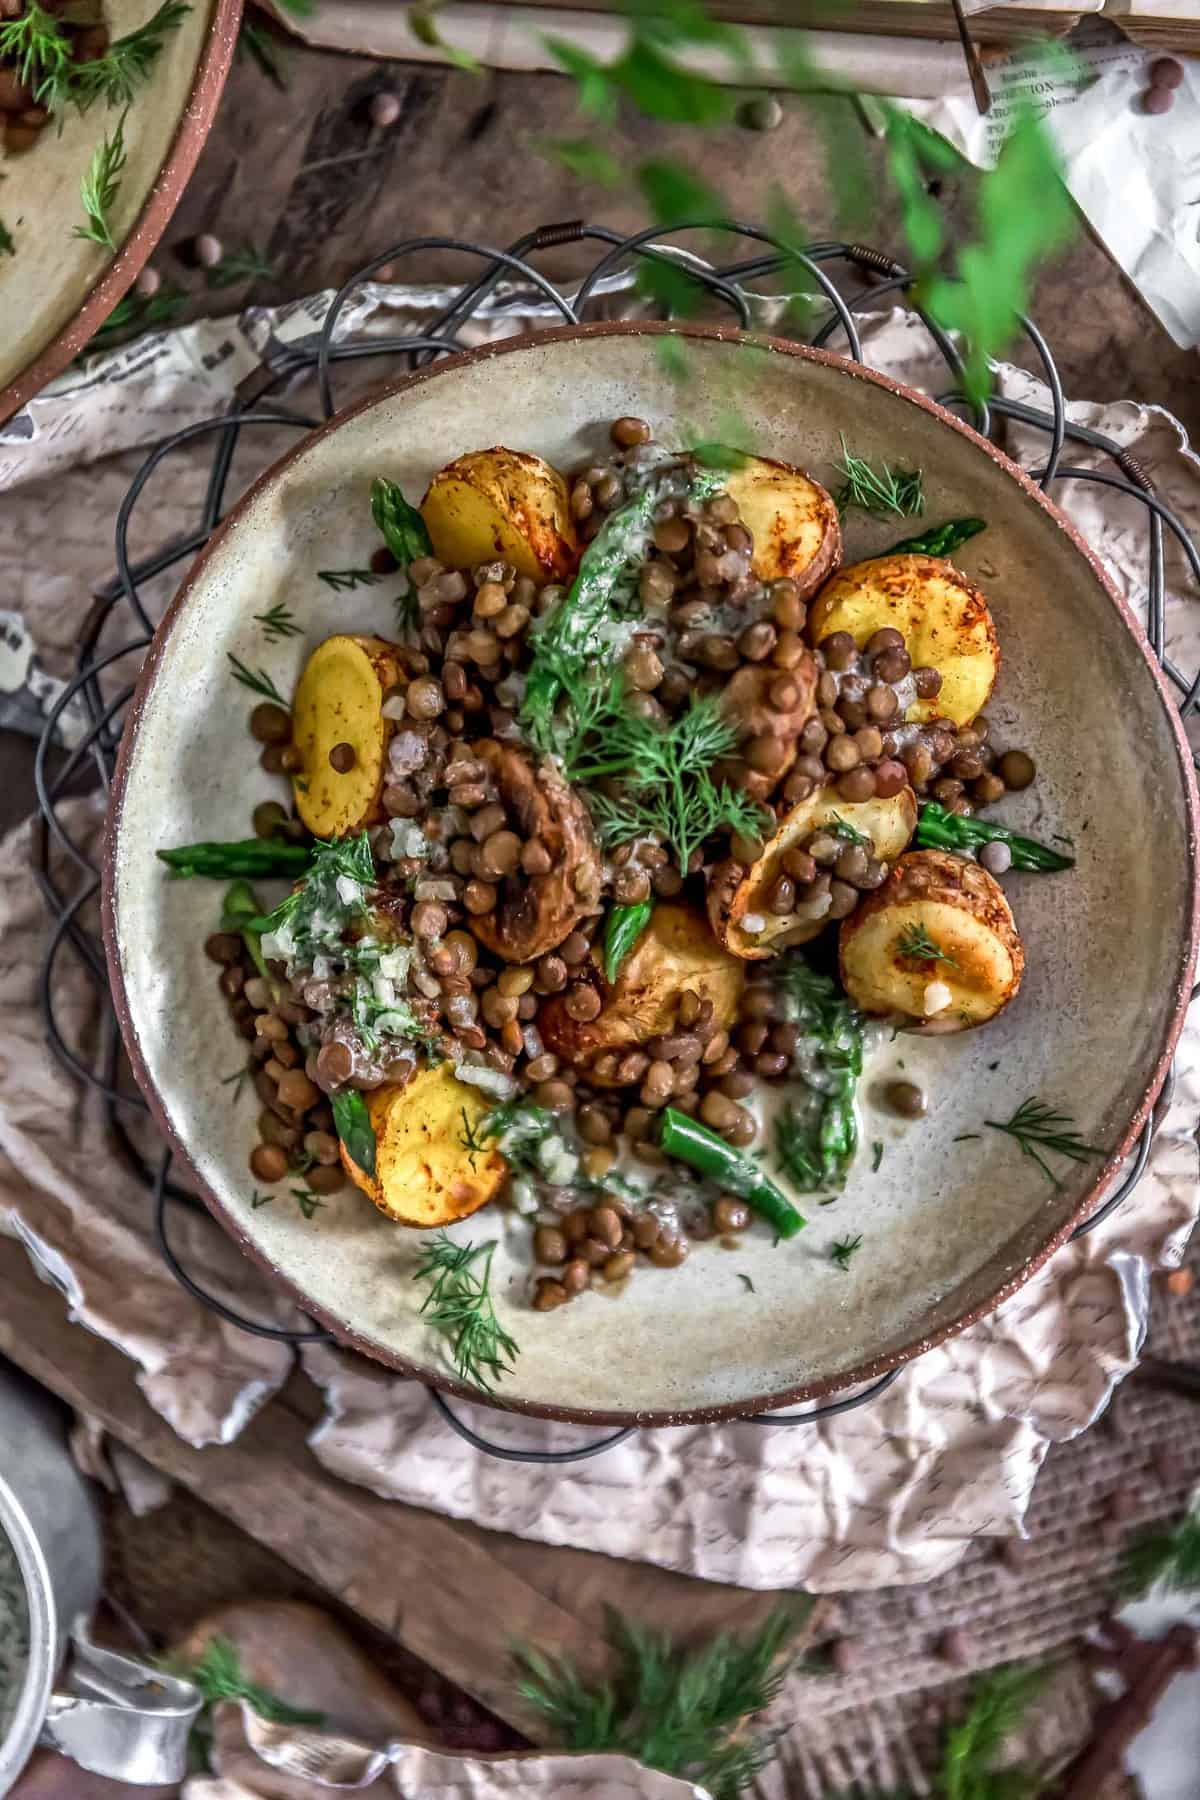 Plated Roasted Potatoes with Seasoned Lentils and Dill Sauce